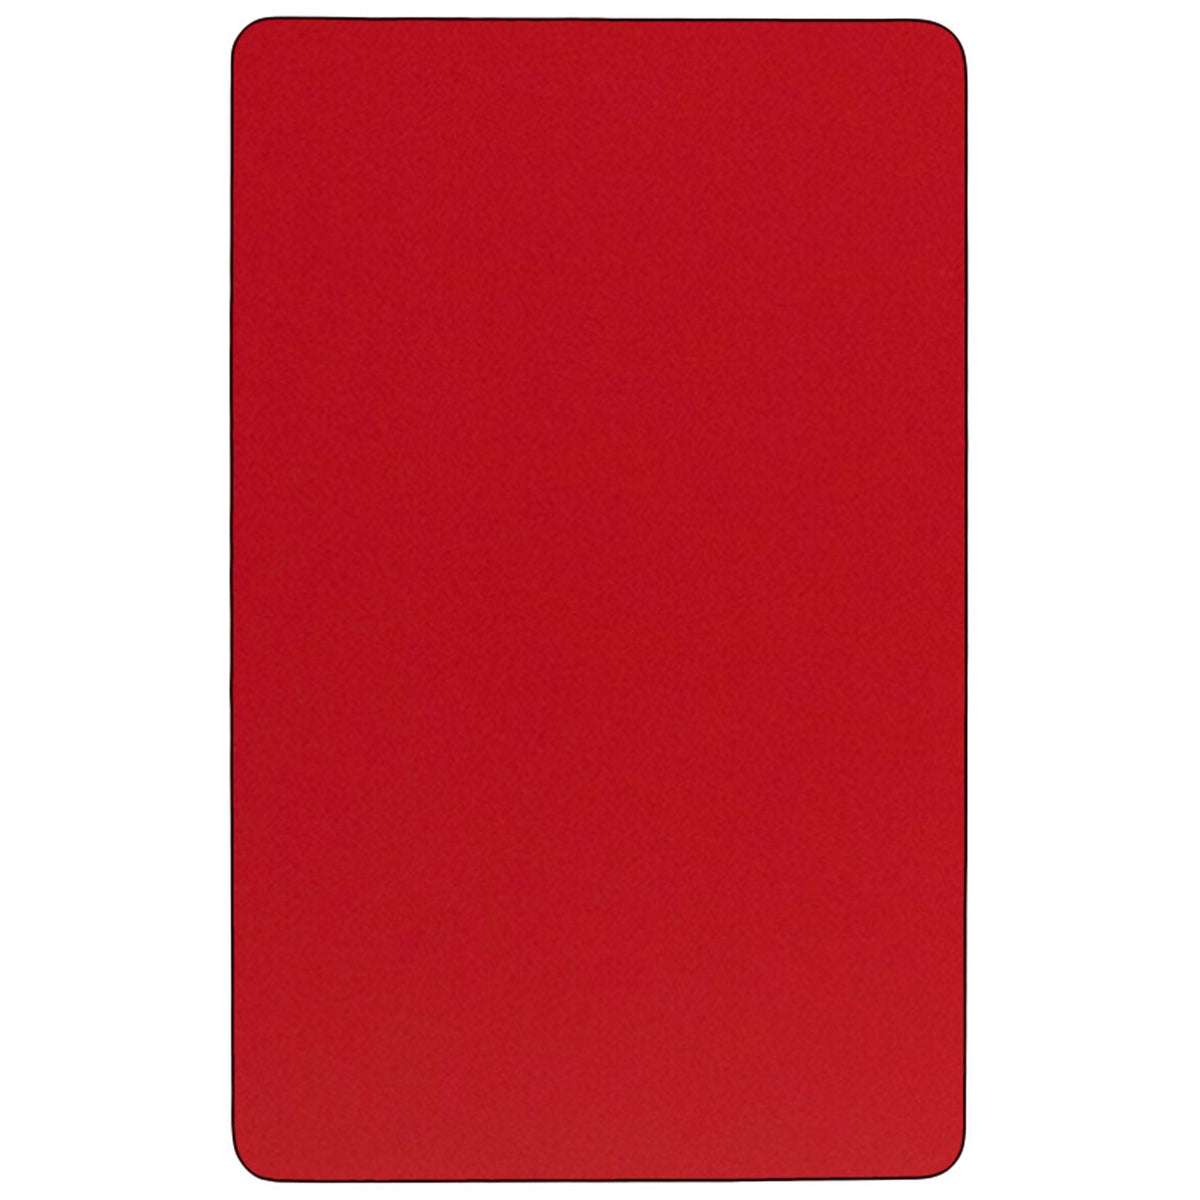 Red |#| 24inchW x 48inchL REC Red HP Laminate Activity Table - Height Adjustable Short Legs